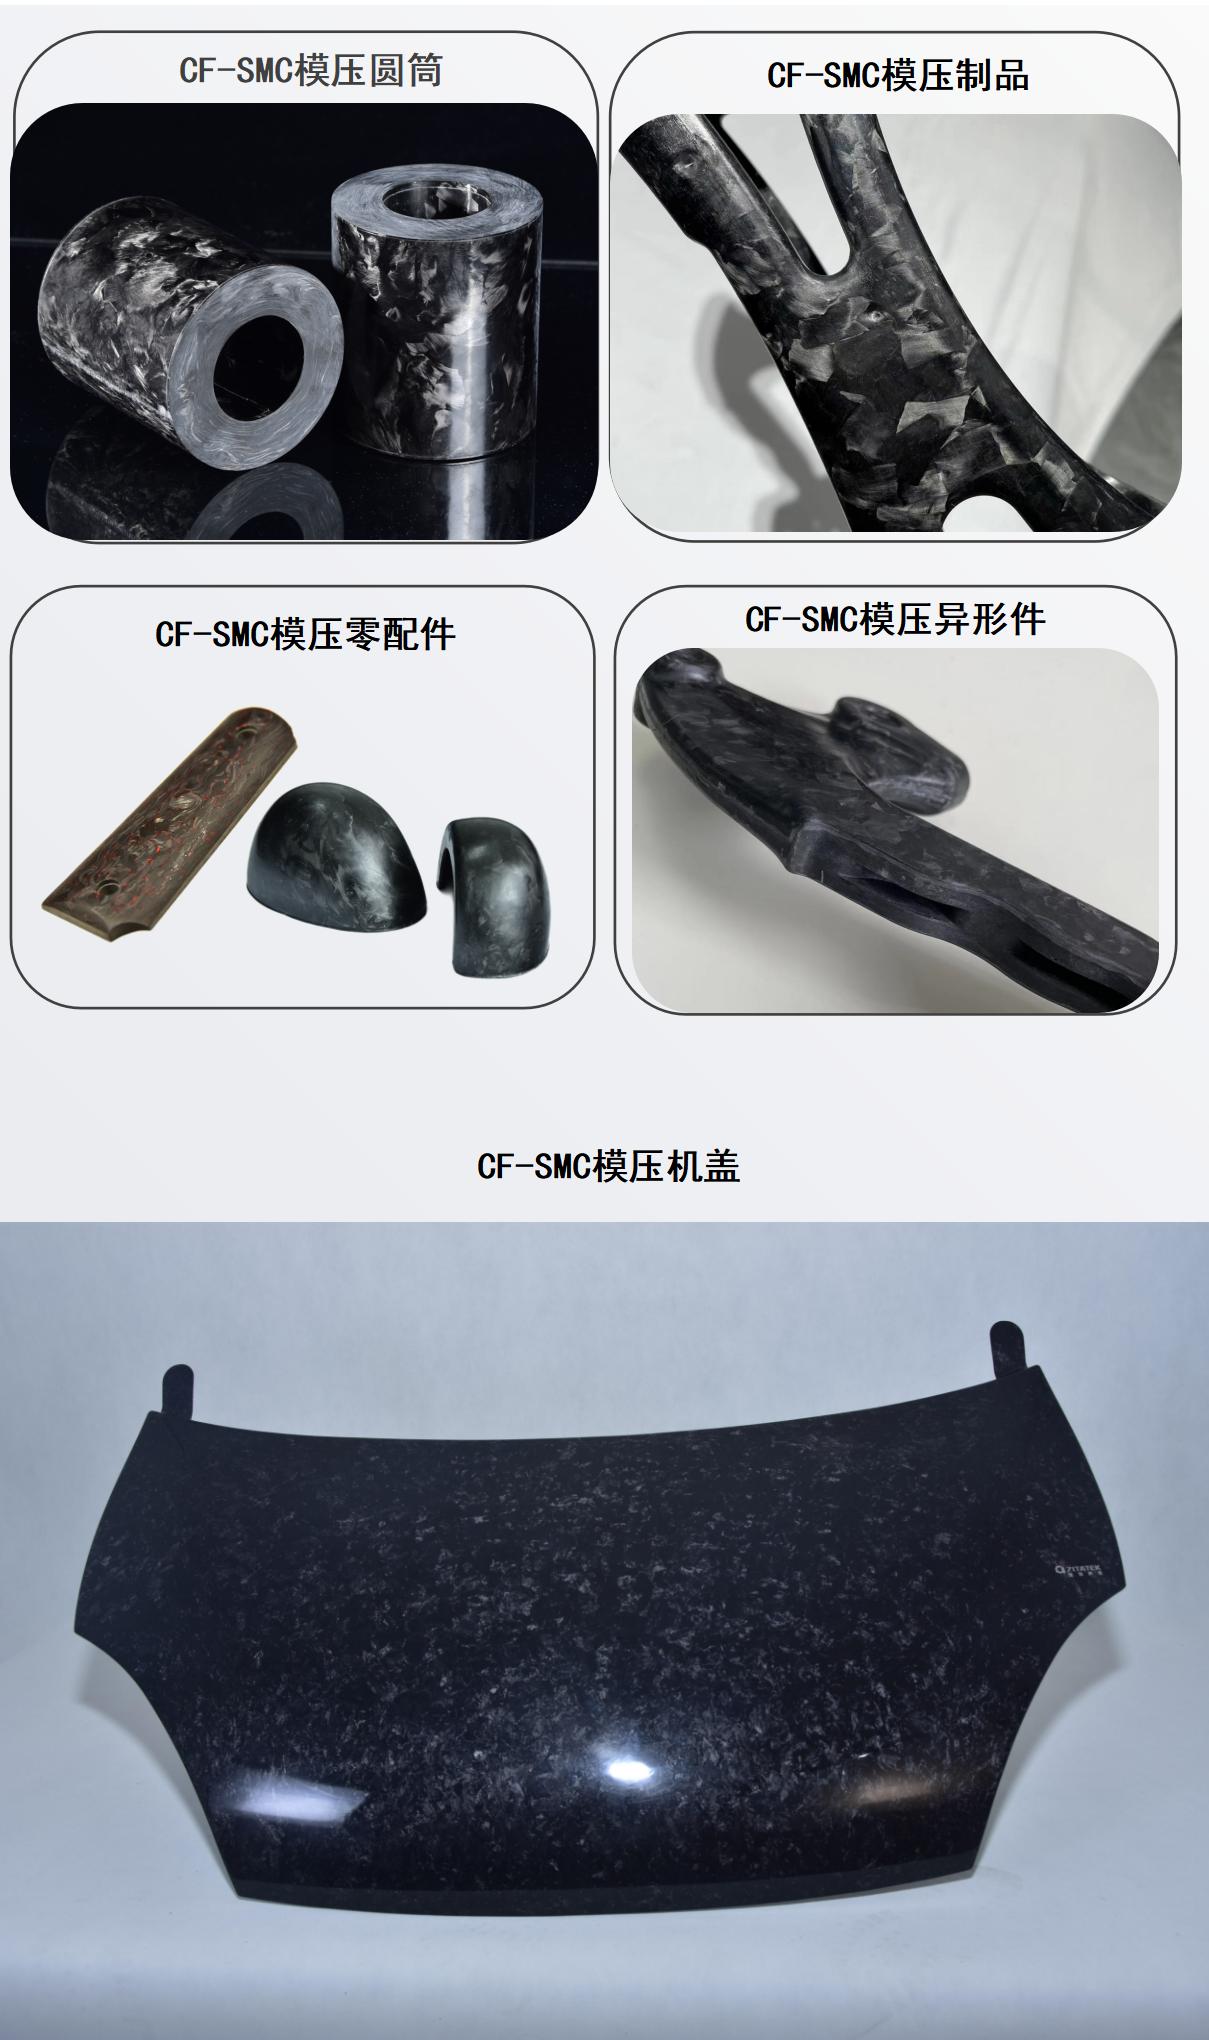 Carbon fiber SMC composite material, forged carbon fiber sheet material, epoxy thermosetting molding material, forged random pattern carbon fiber